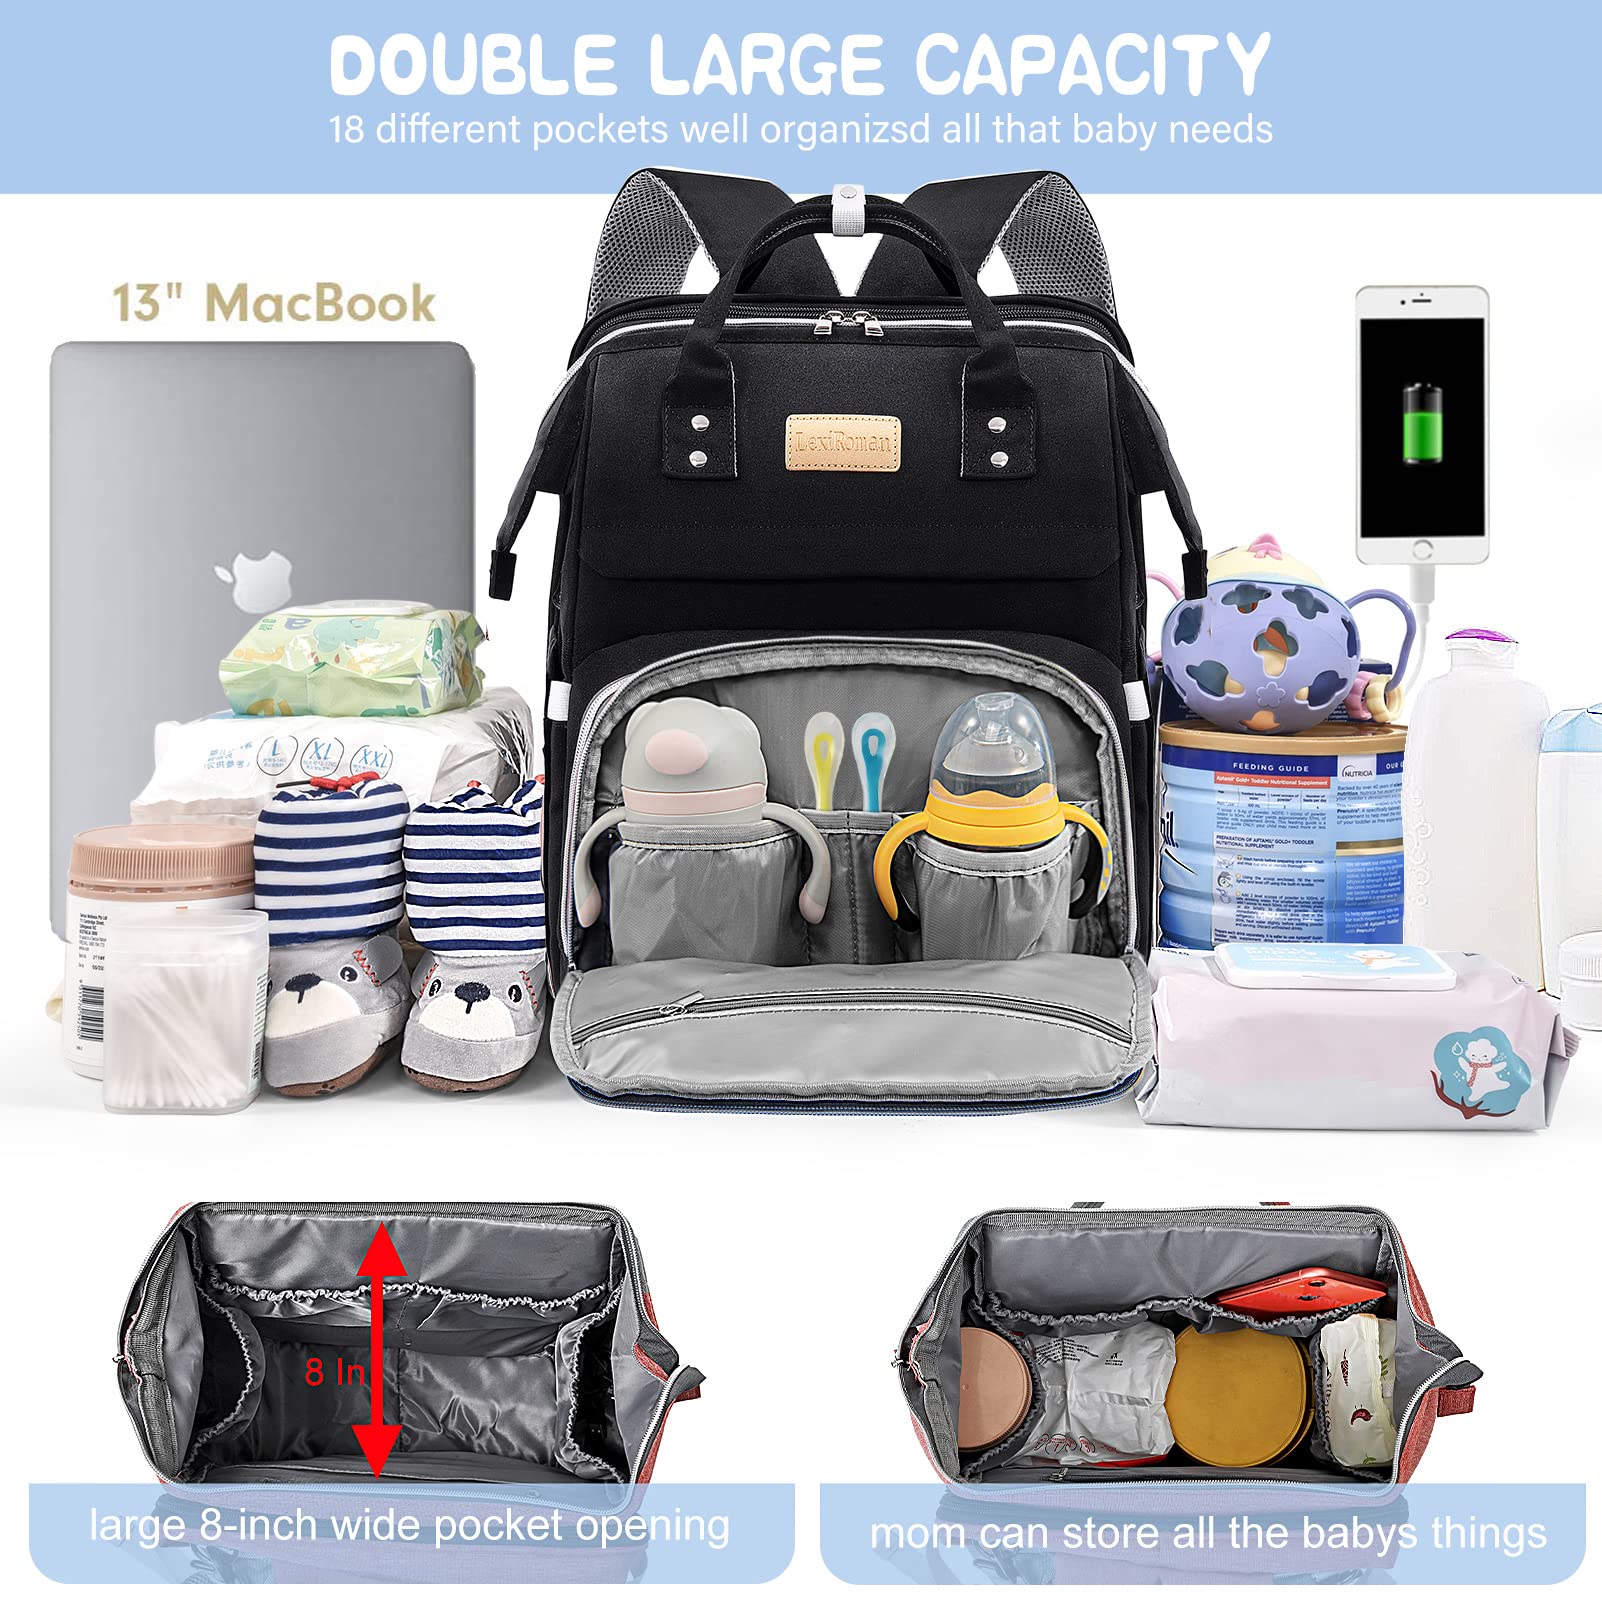 Diaper Bag Backpack, Large Capacity Multifunction Diaper Backpack with Changing Pad for Boy Girl, Travel Baby Bag for Moms Dads, Baby Registry Search Shower Gifts Waterproof and Stylish Black